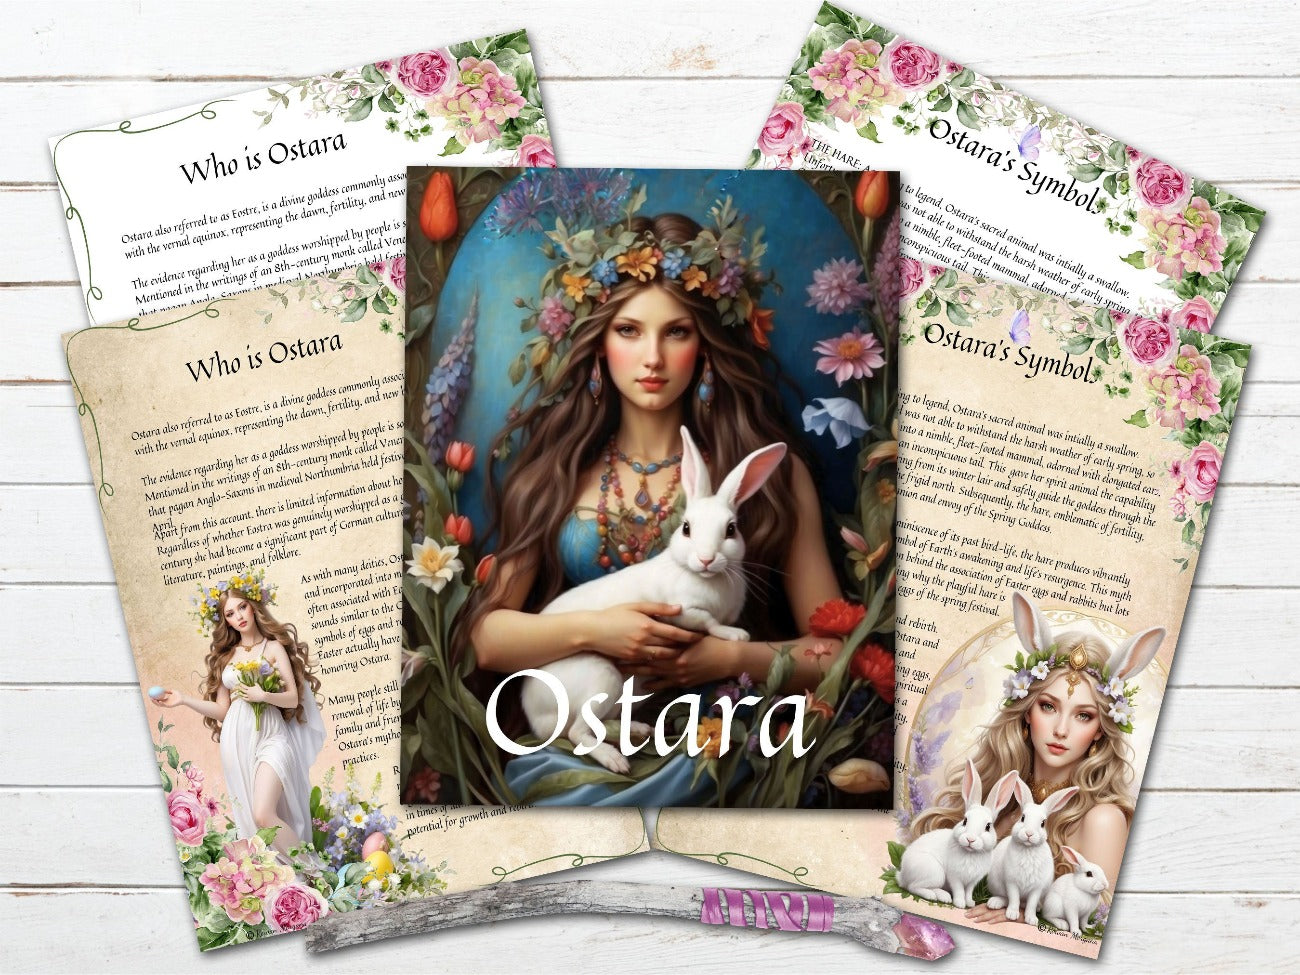 GODDESS OSTARA, Title page, Who is Ostara and Ostaras Symbols shown with both the parchment and white backgrounds - Morgana Magick Spell